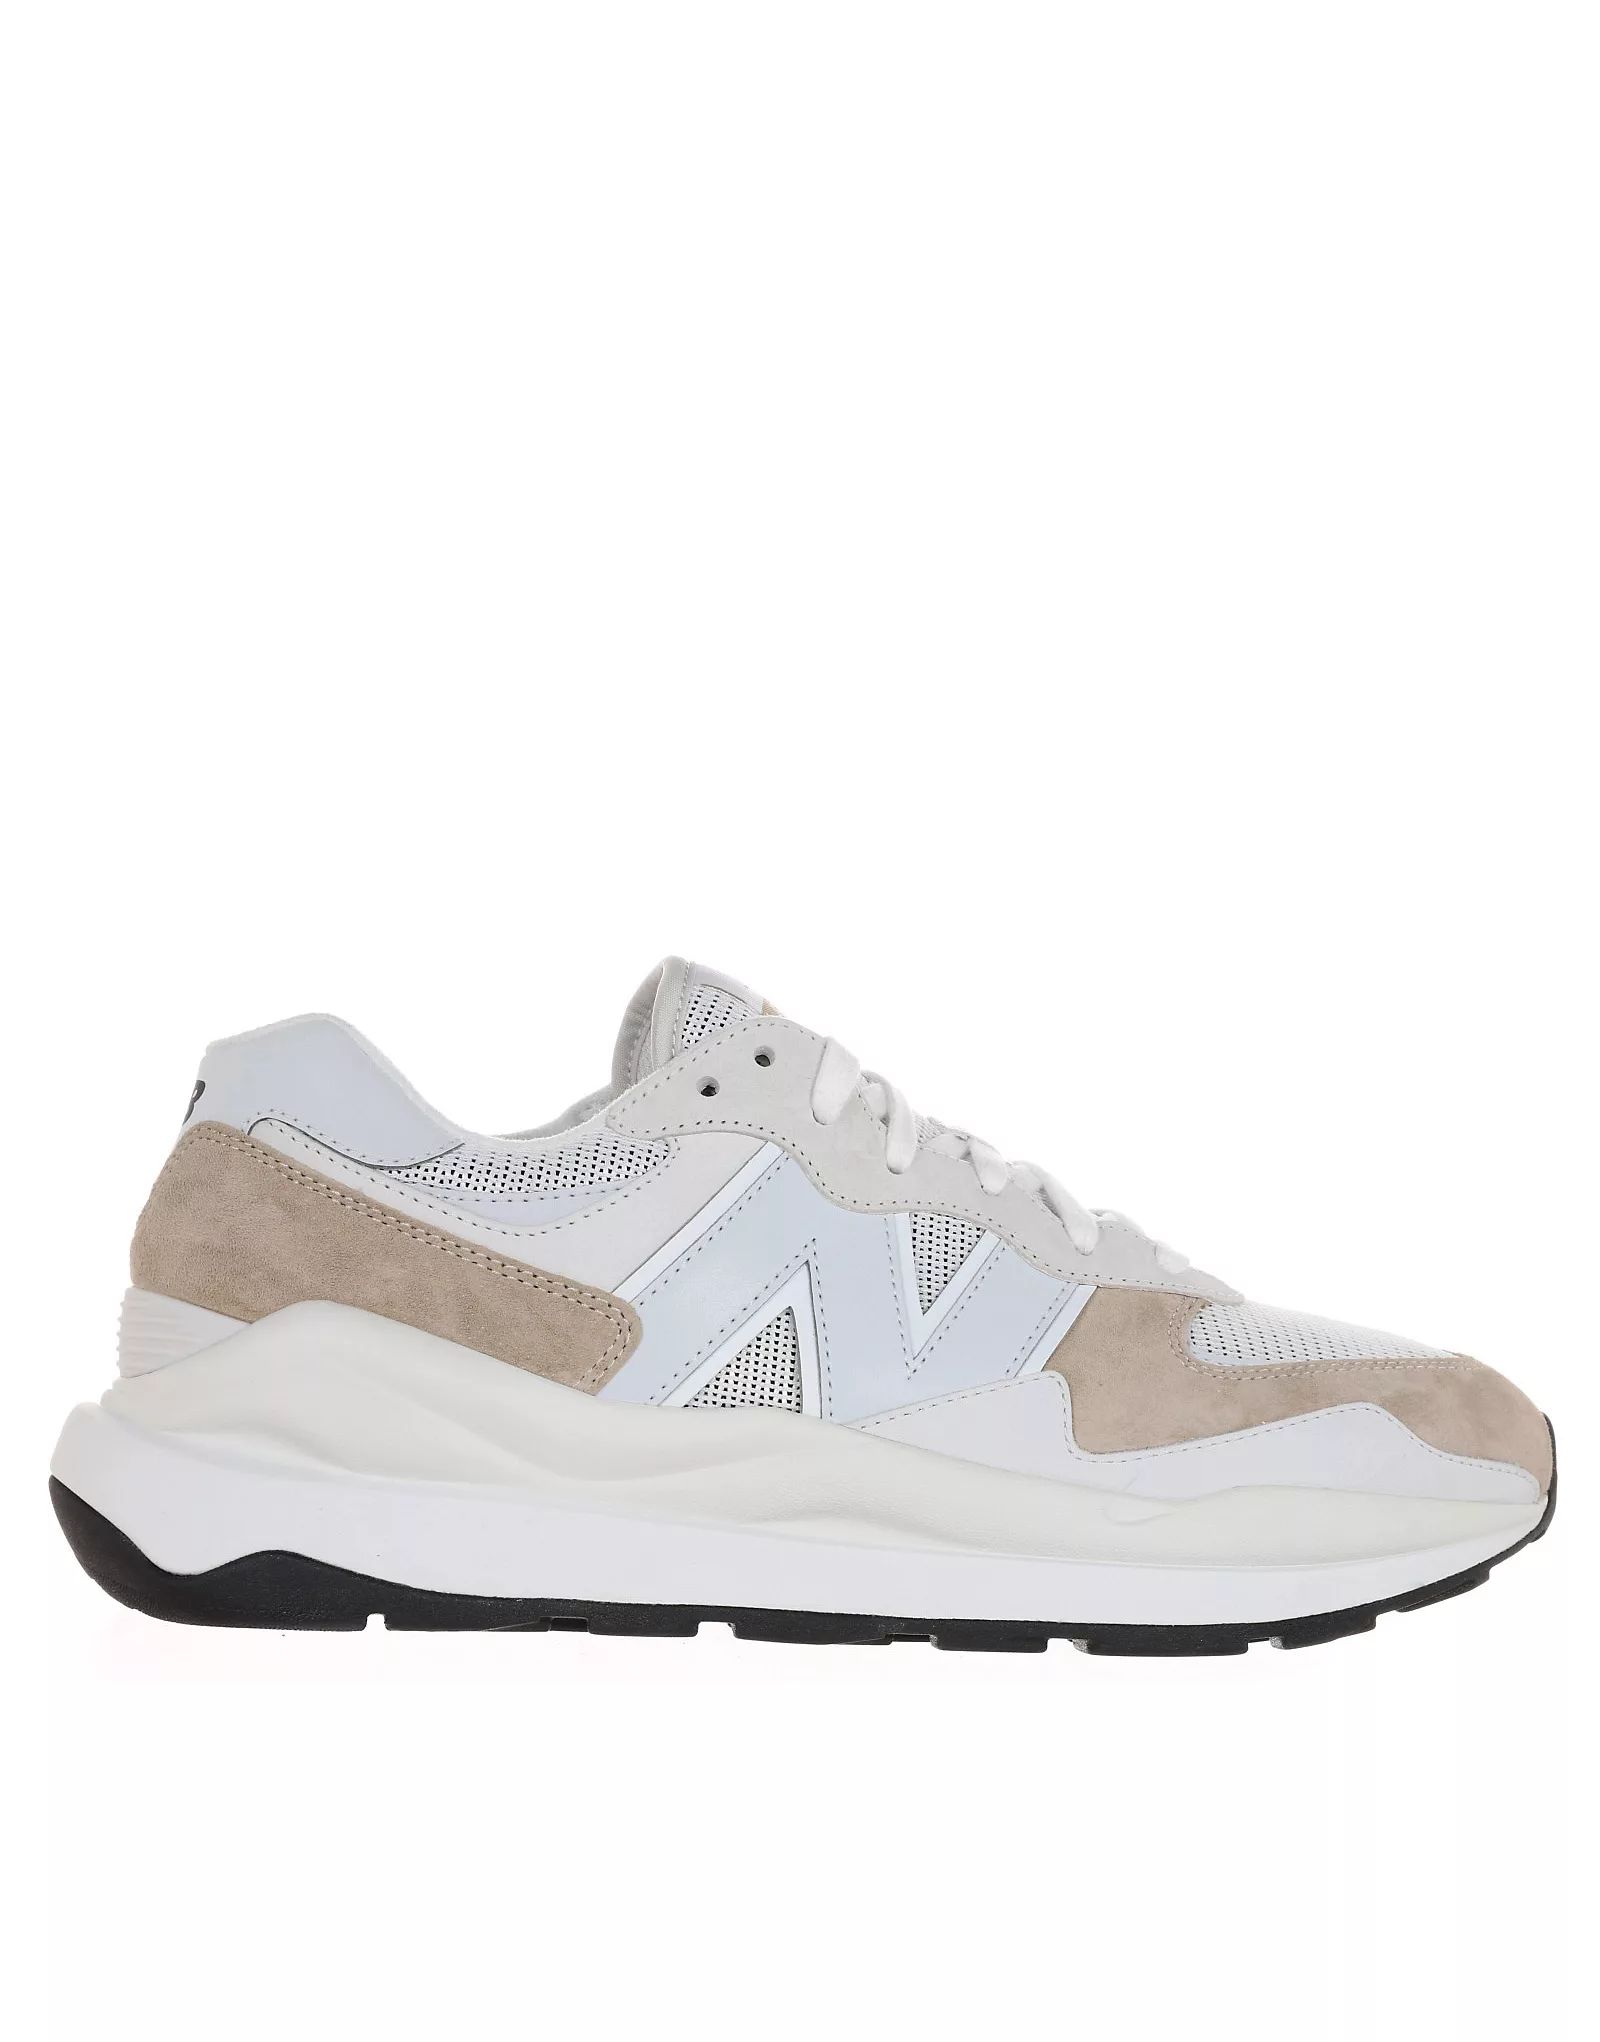 New Balance 57/40 sneakers in white with peach detail | ASOS (Global)